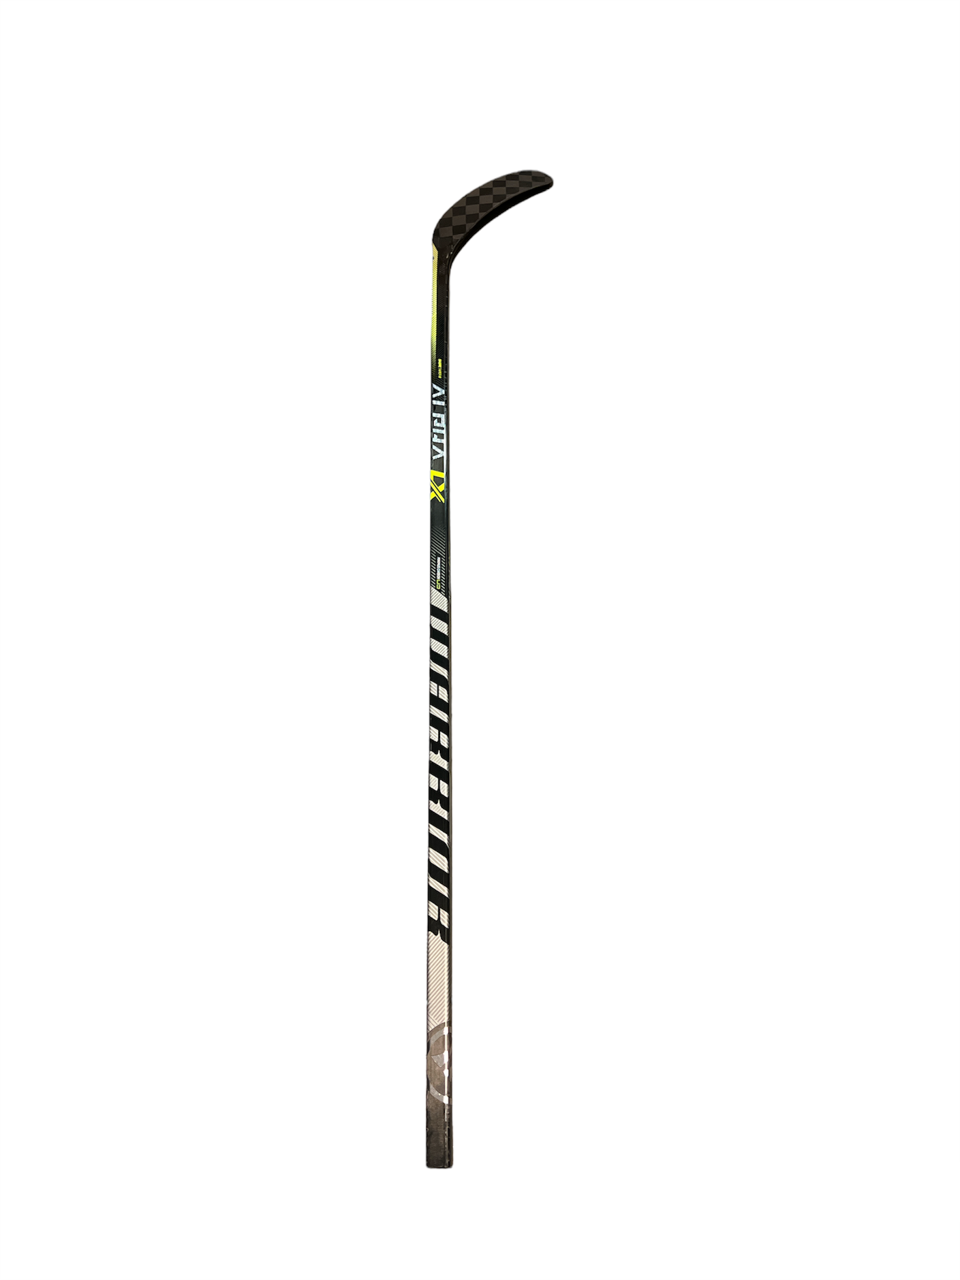 KERO NEW WARRIOR TEAM ISSUED STICK Side View